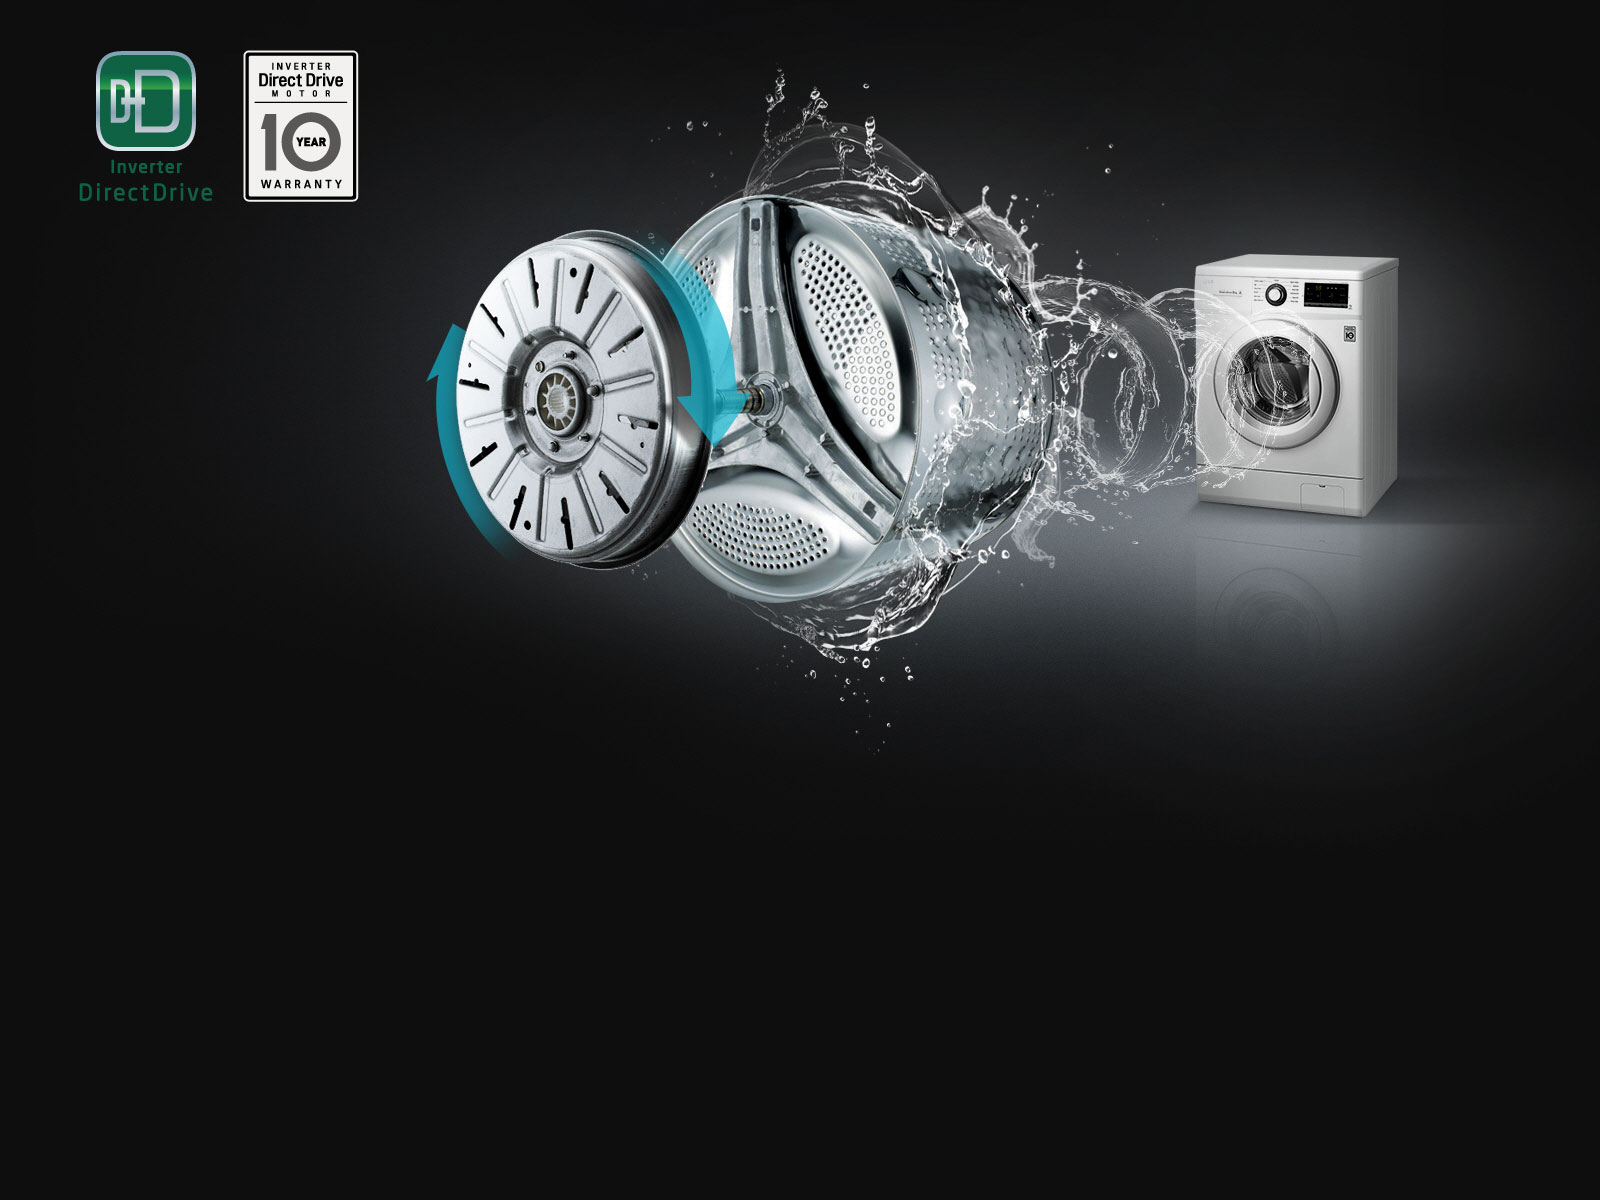 Inverter for a Powerful Wash with Less Noise using direct drive teachnology LG FH2J3QDNL02 front load washing machine